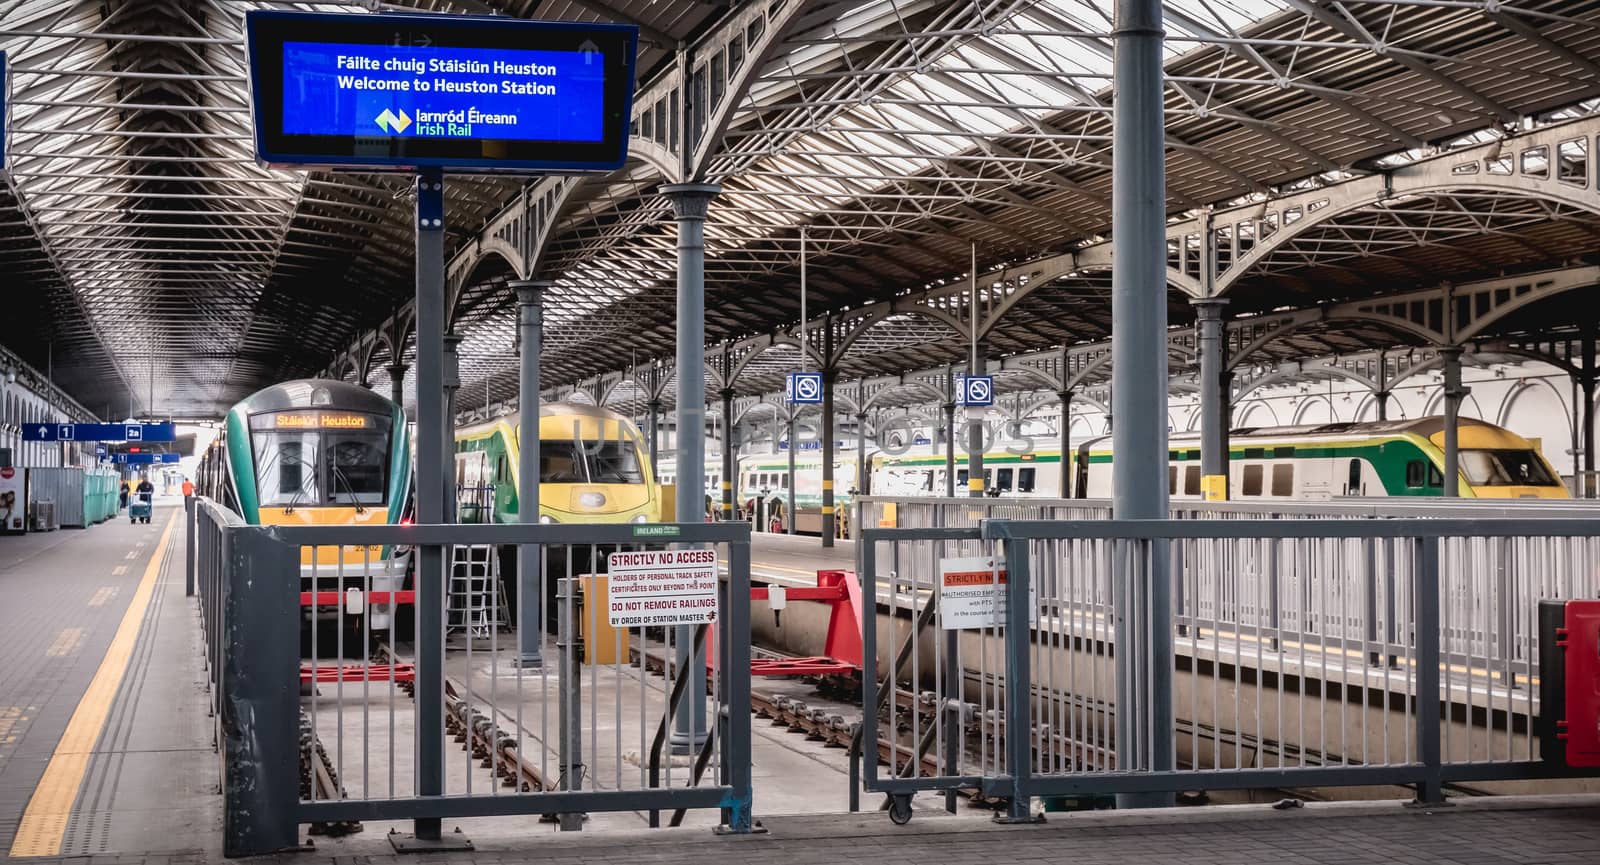 Dublin, Ireland - February 16, 2019: Train access platform at Heuston station where trains are parked on a winter day